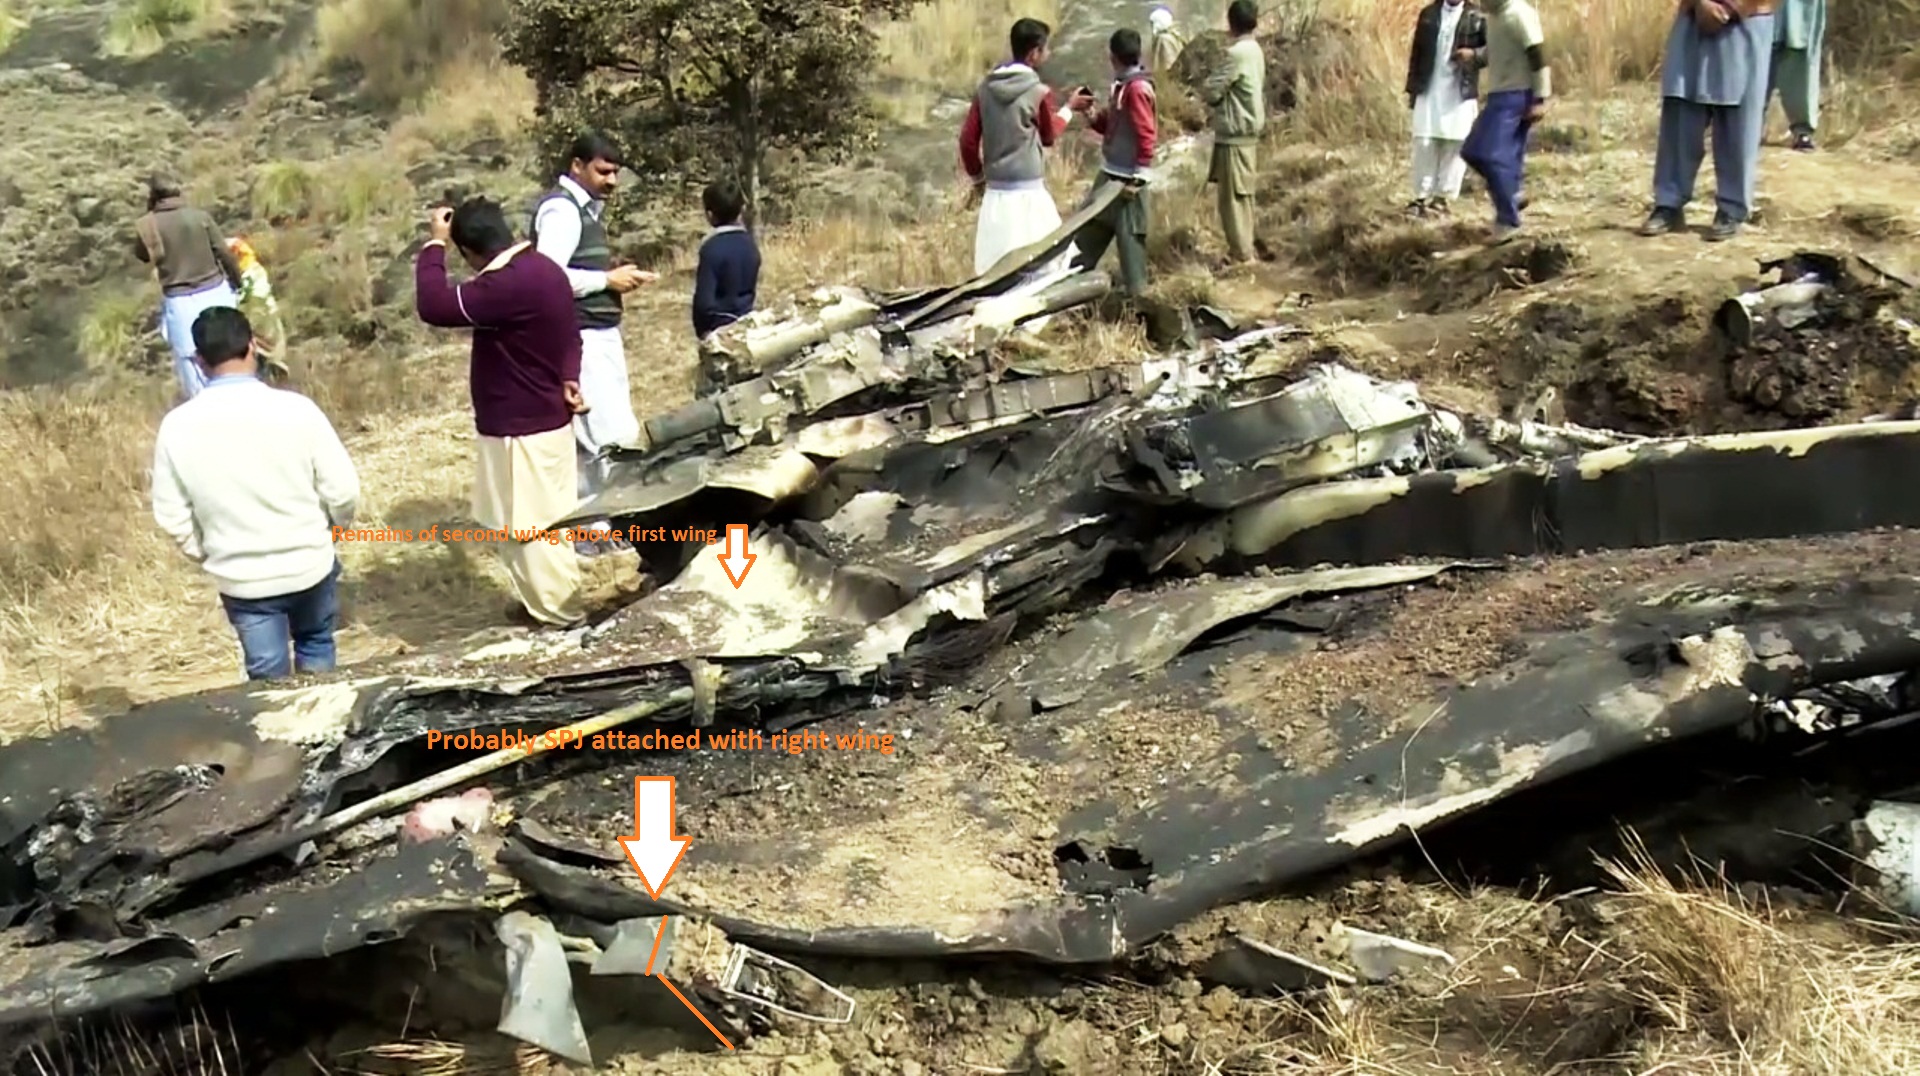 WRECKAGE of Indian Jet in Pak 27-2-2019(16 Probably SPJ attached with right wing)-Labelled.jpg